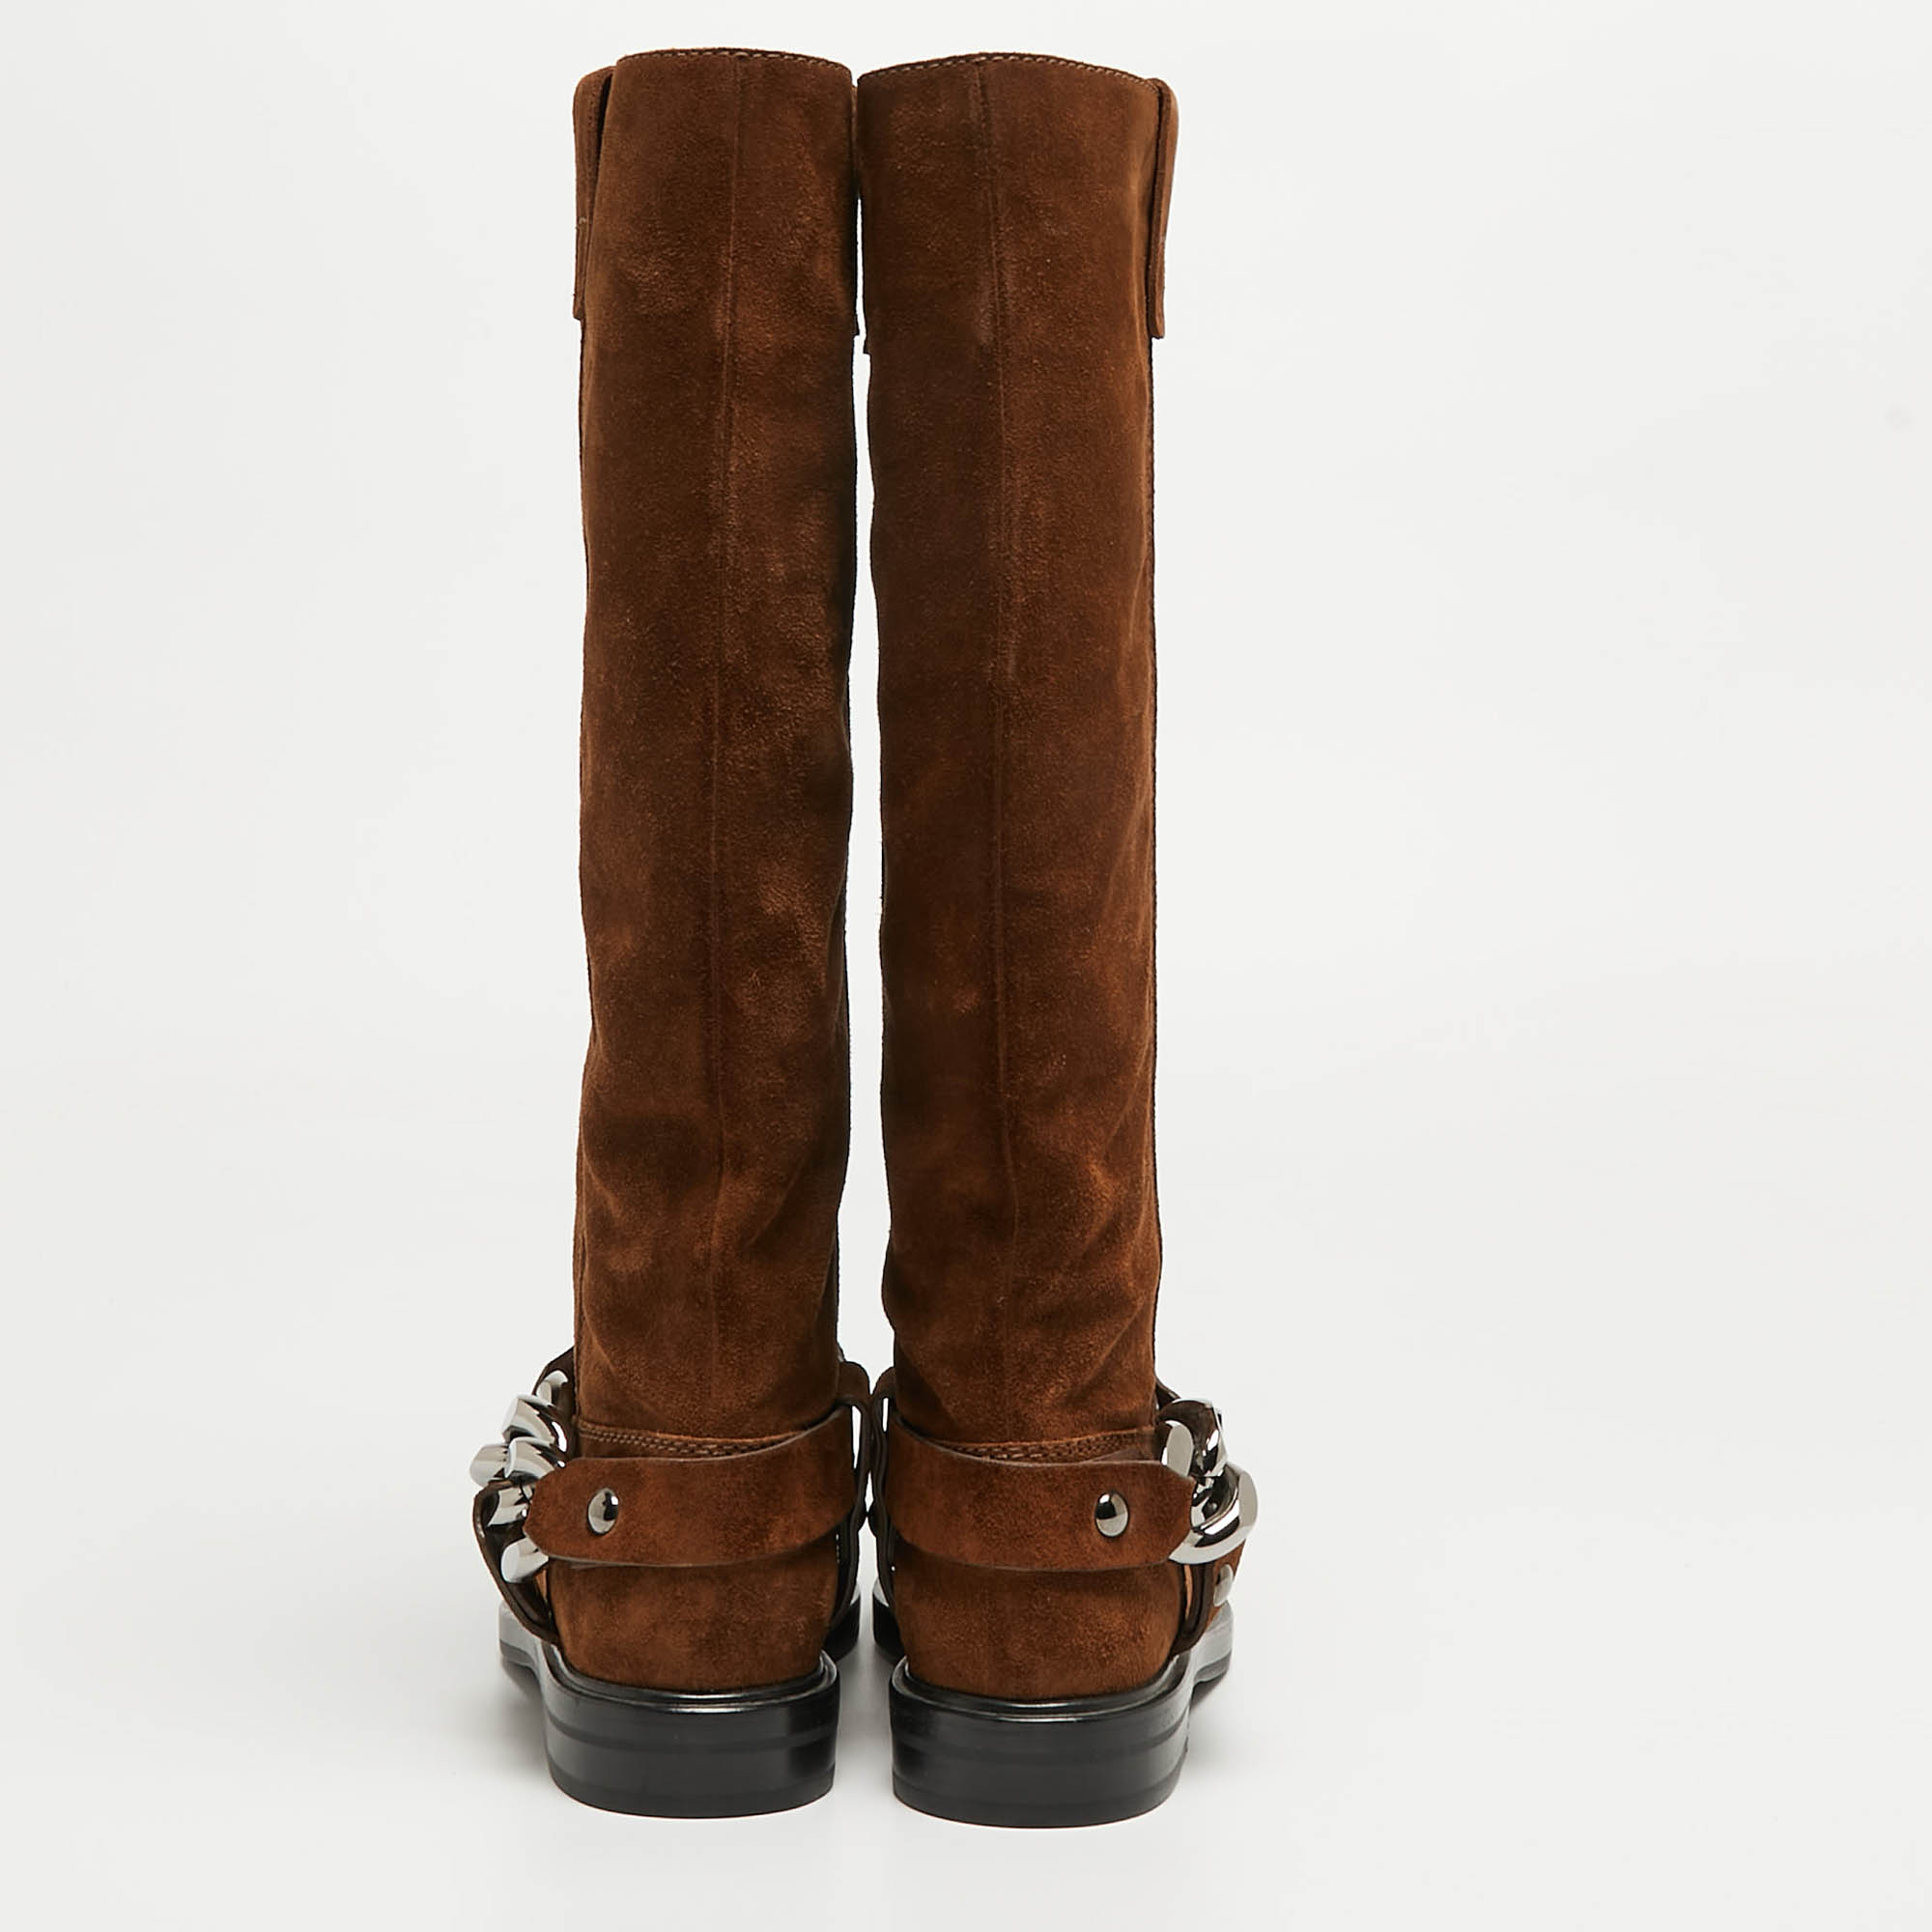 Casadei Brown Suede Knee Length Boots Size 36